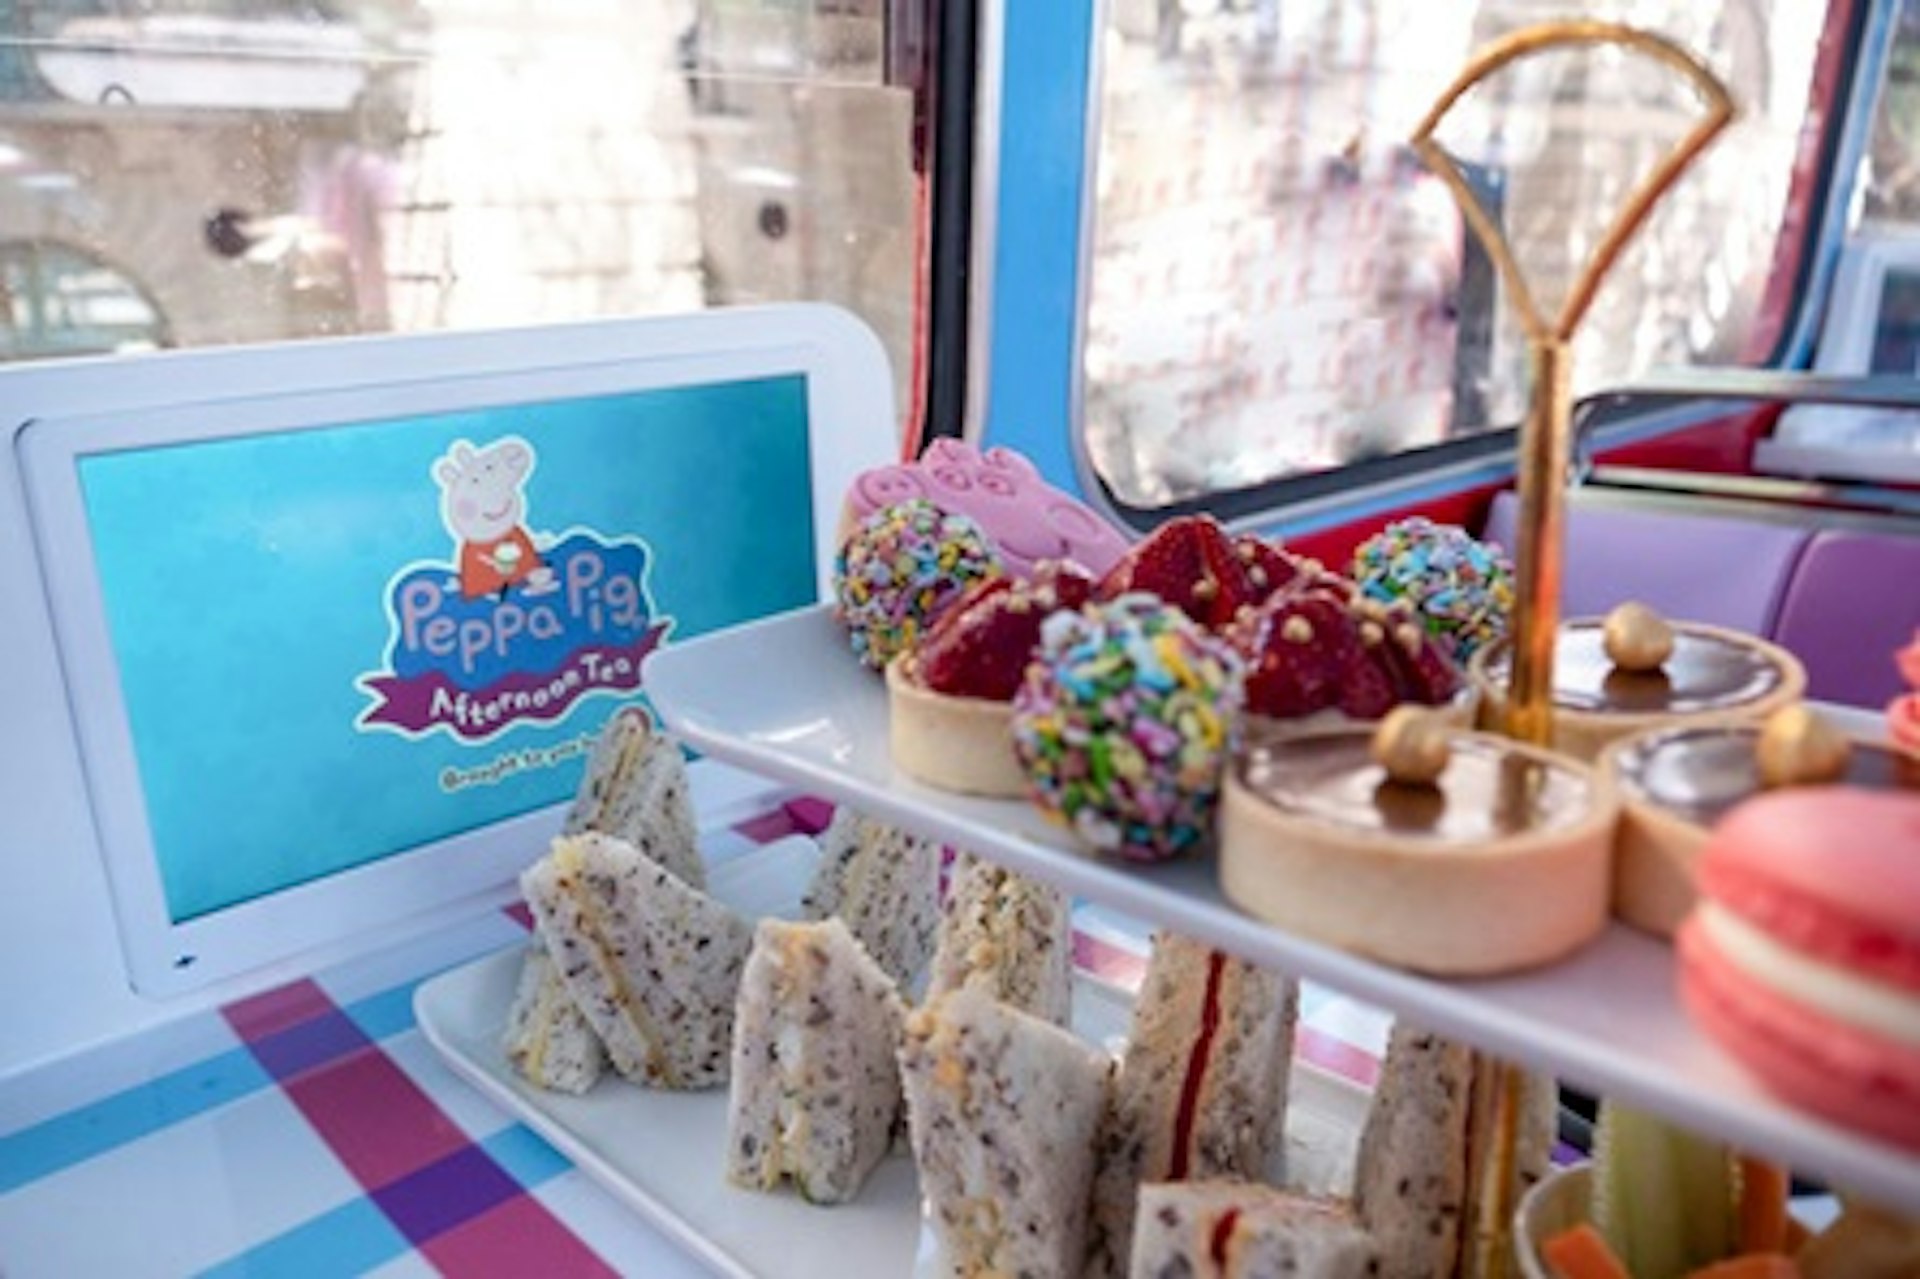 Peppa Pig Afternoon Tea Bus Tour for Two Adults and Two Children 3